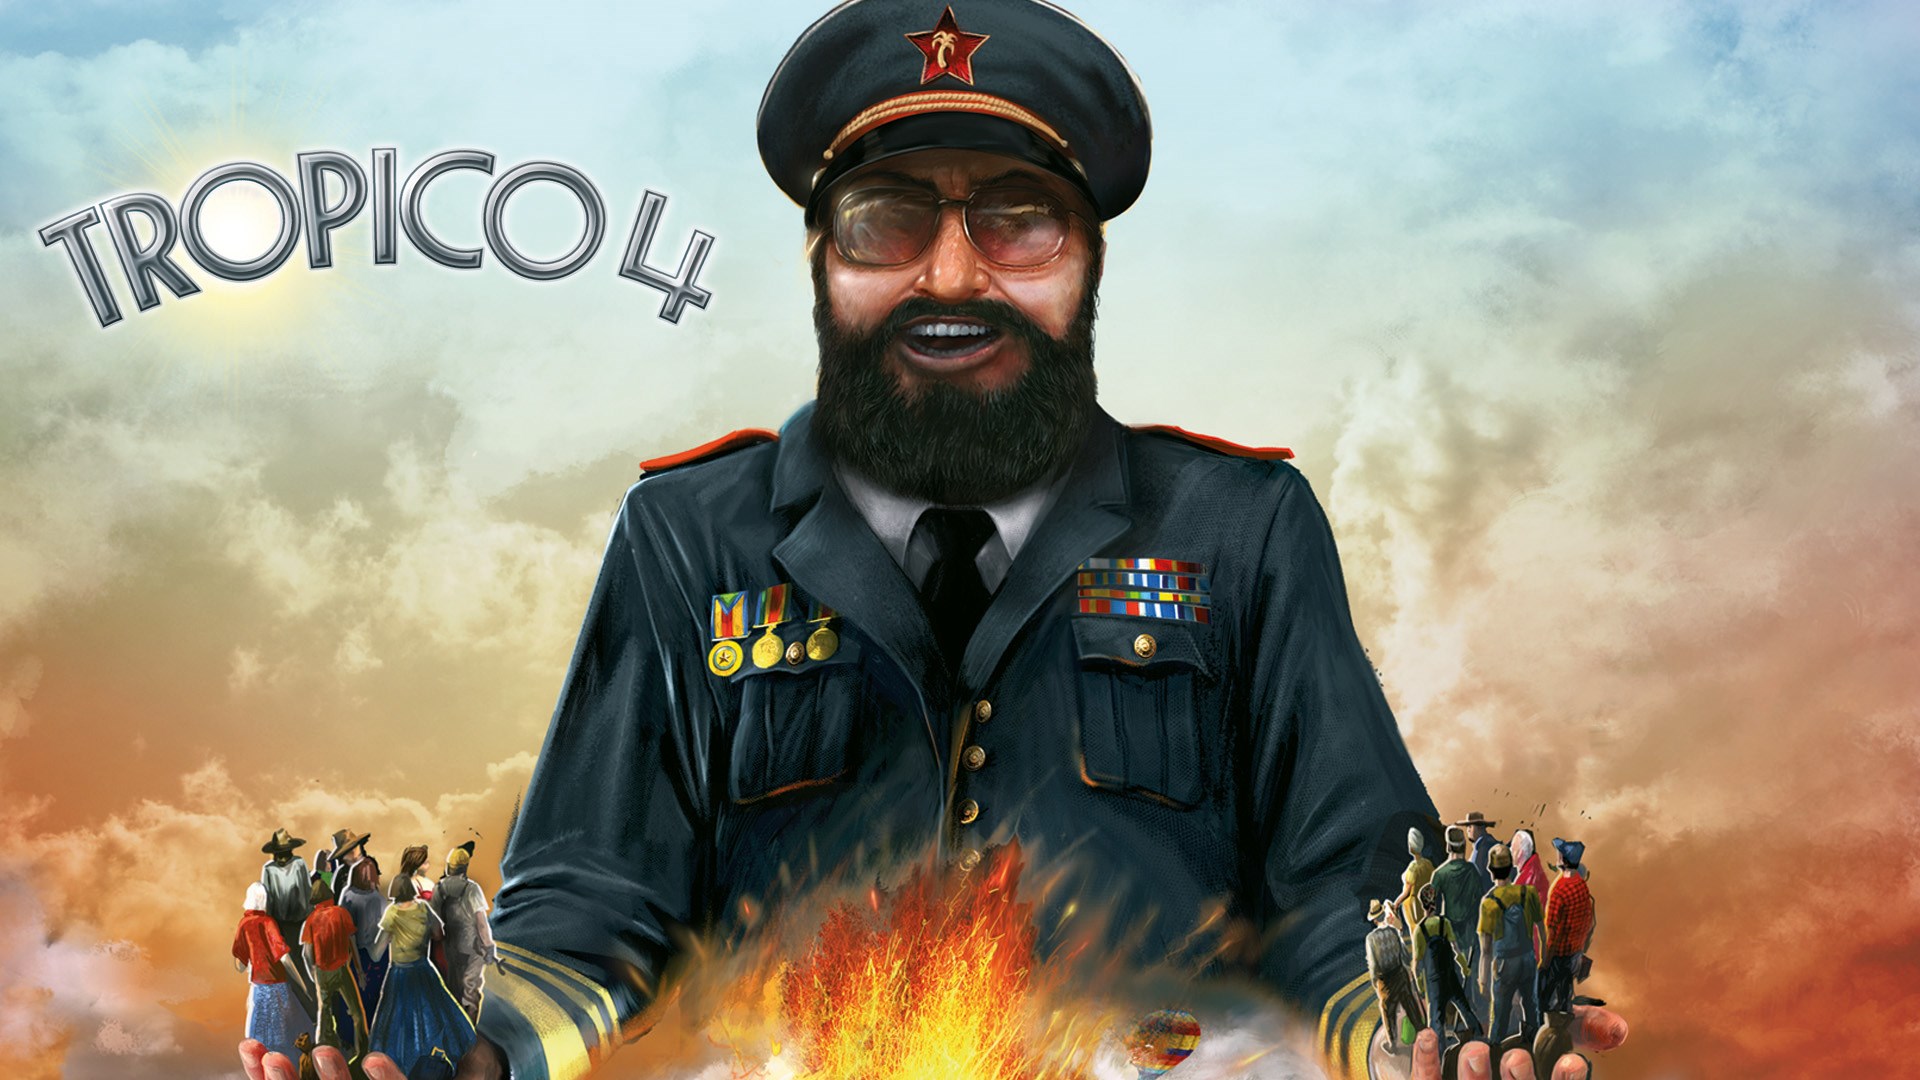 Tropico 4 free full pc game for Download